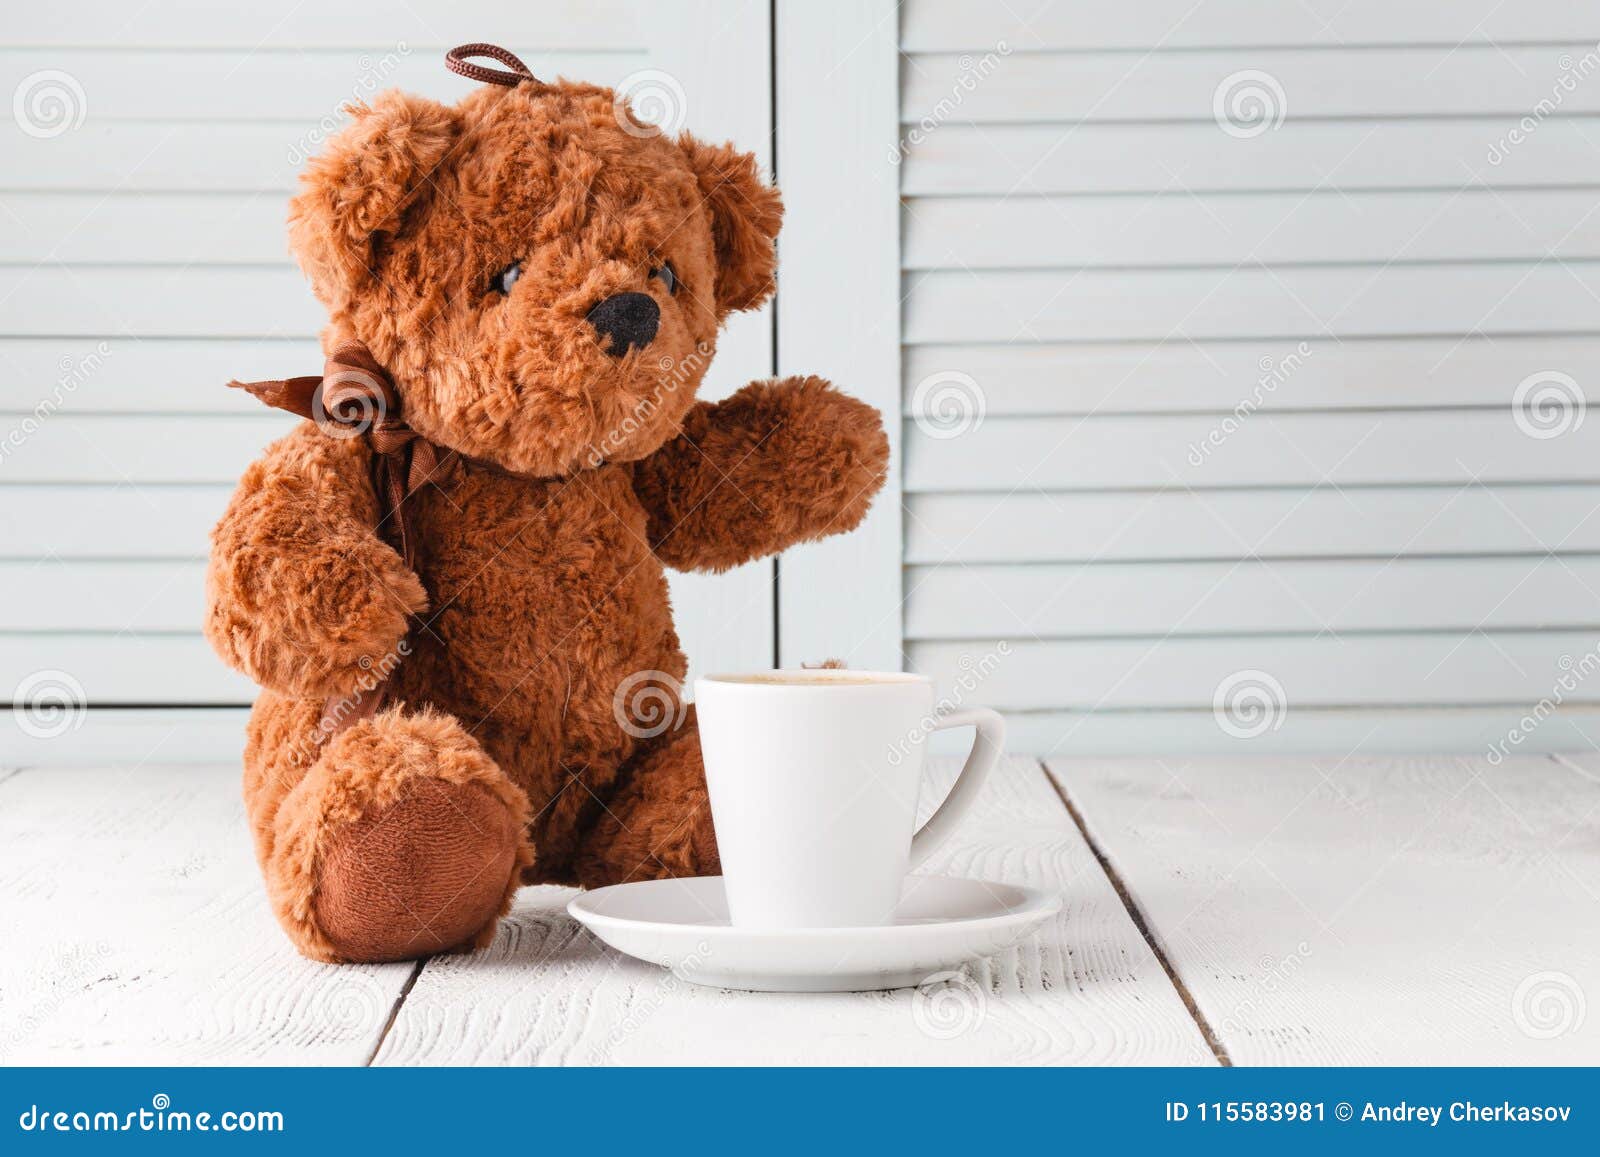 Good Morning with Teddy Bear Stock Image - Image of flower, retro ...